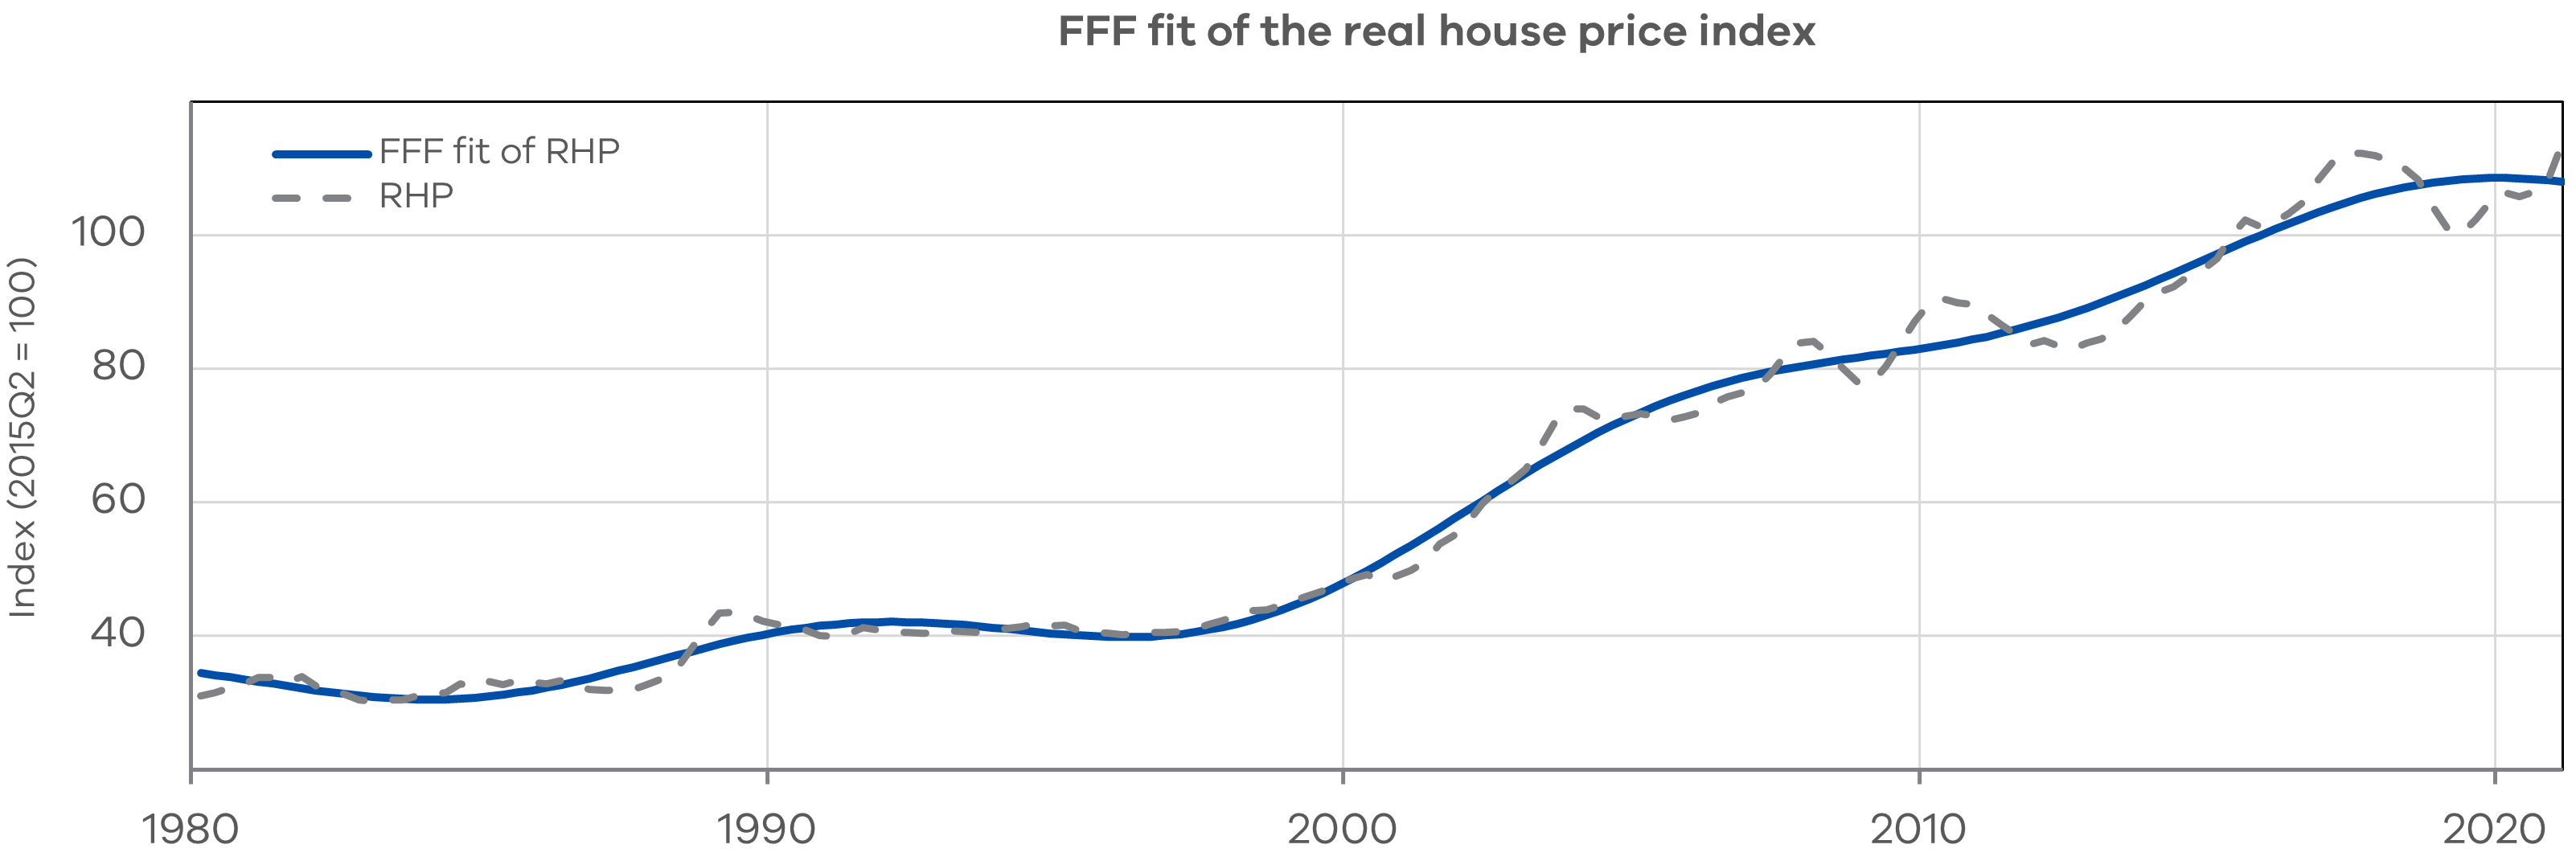 Figure 1a FFF fit of the real house price index